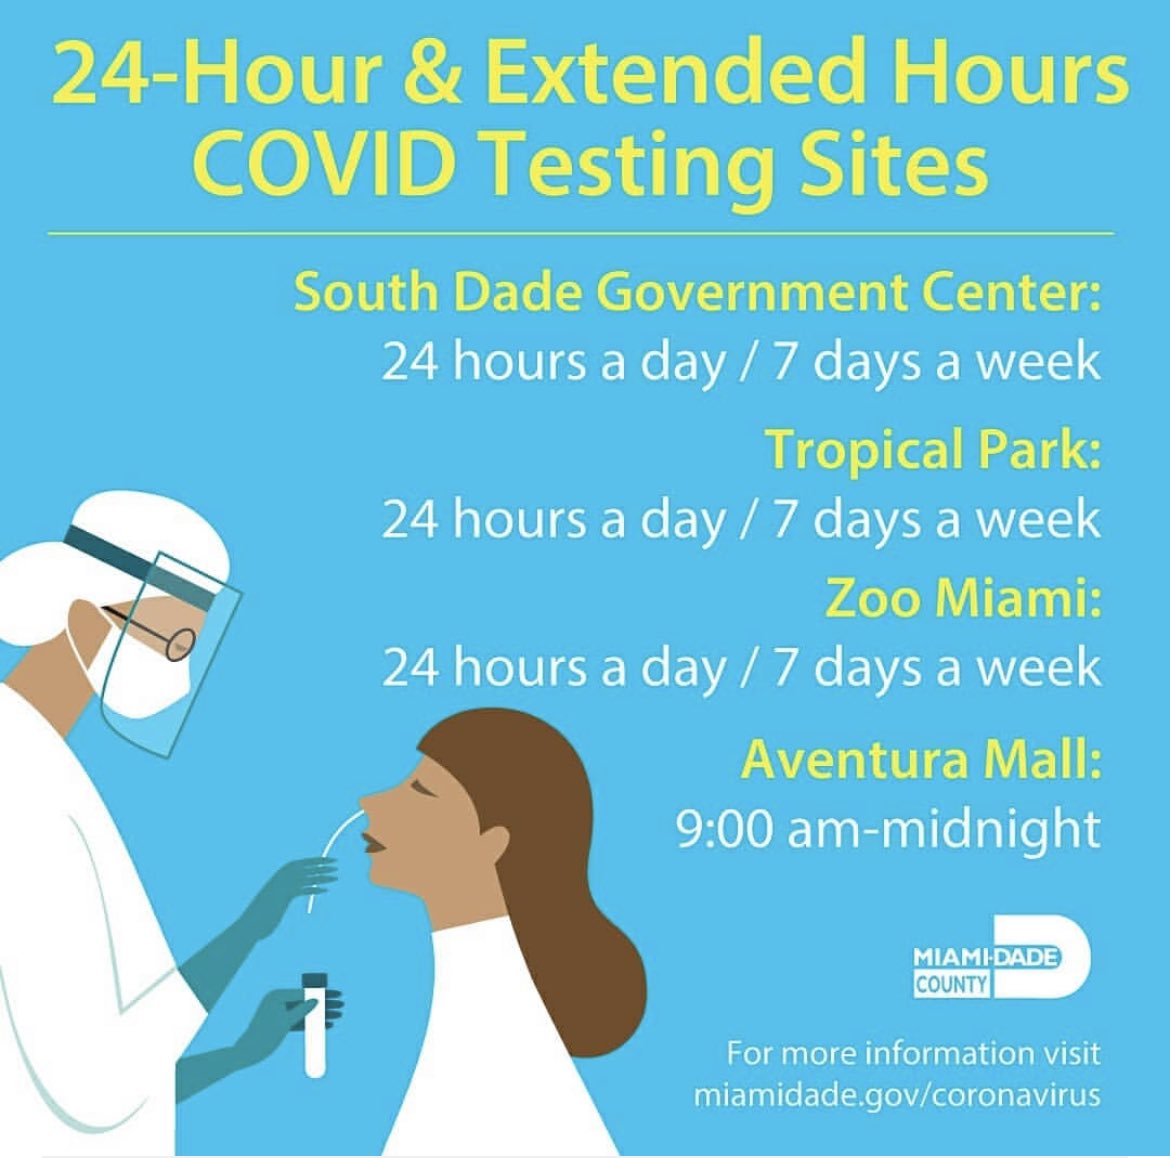 Late night COVID-19 testing sites in Miami Dade County